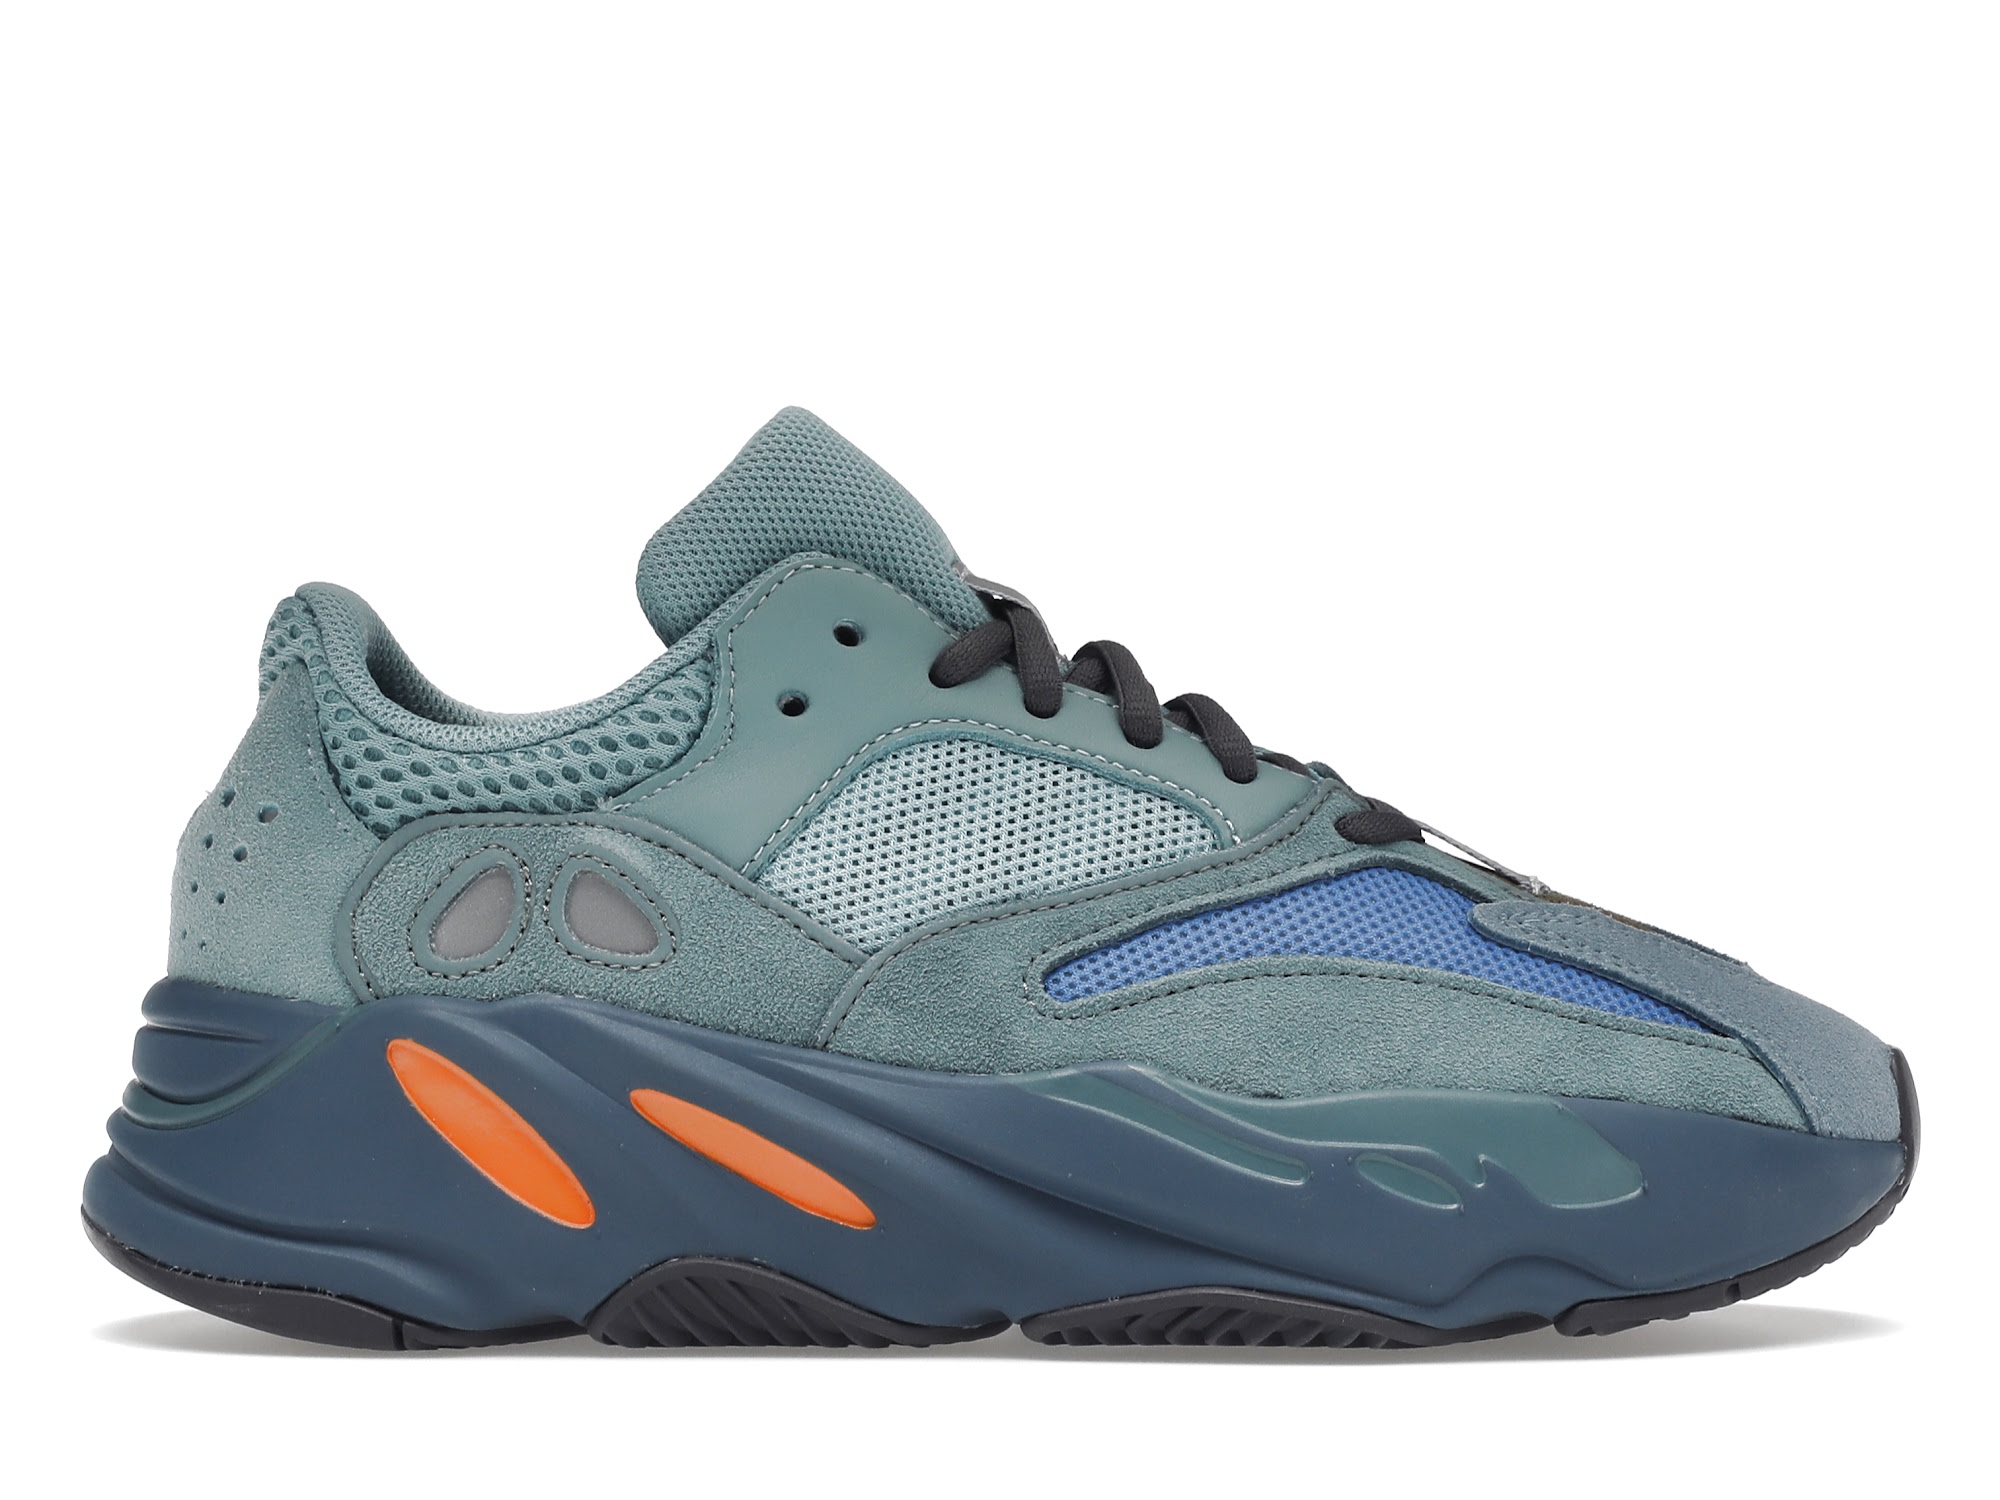 yeezy700 BOOST FADED AZURE 28cm グリーン　緑